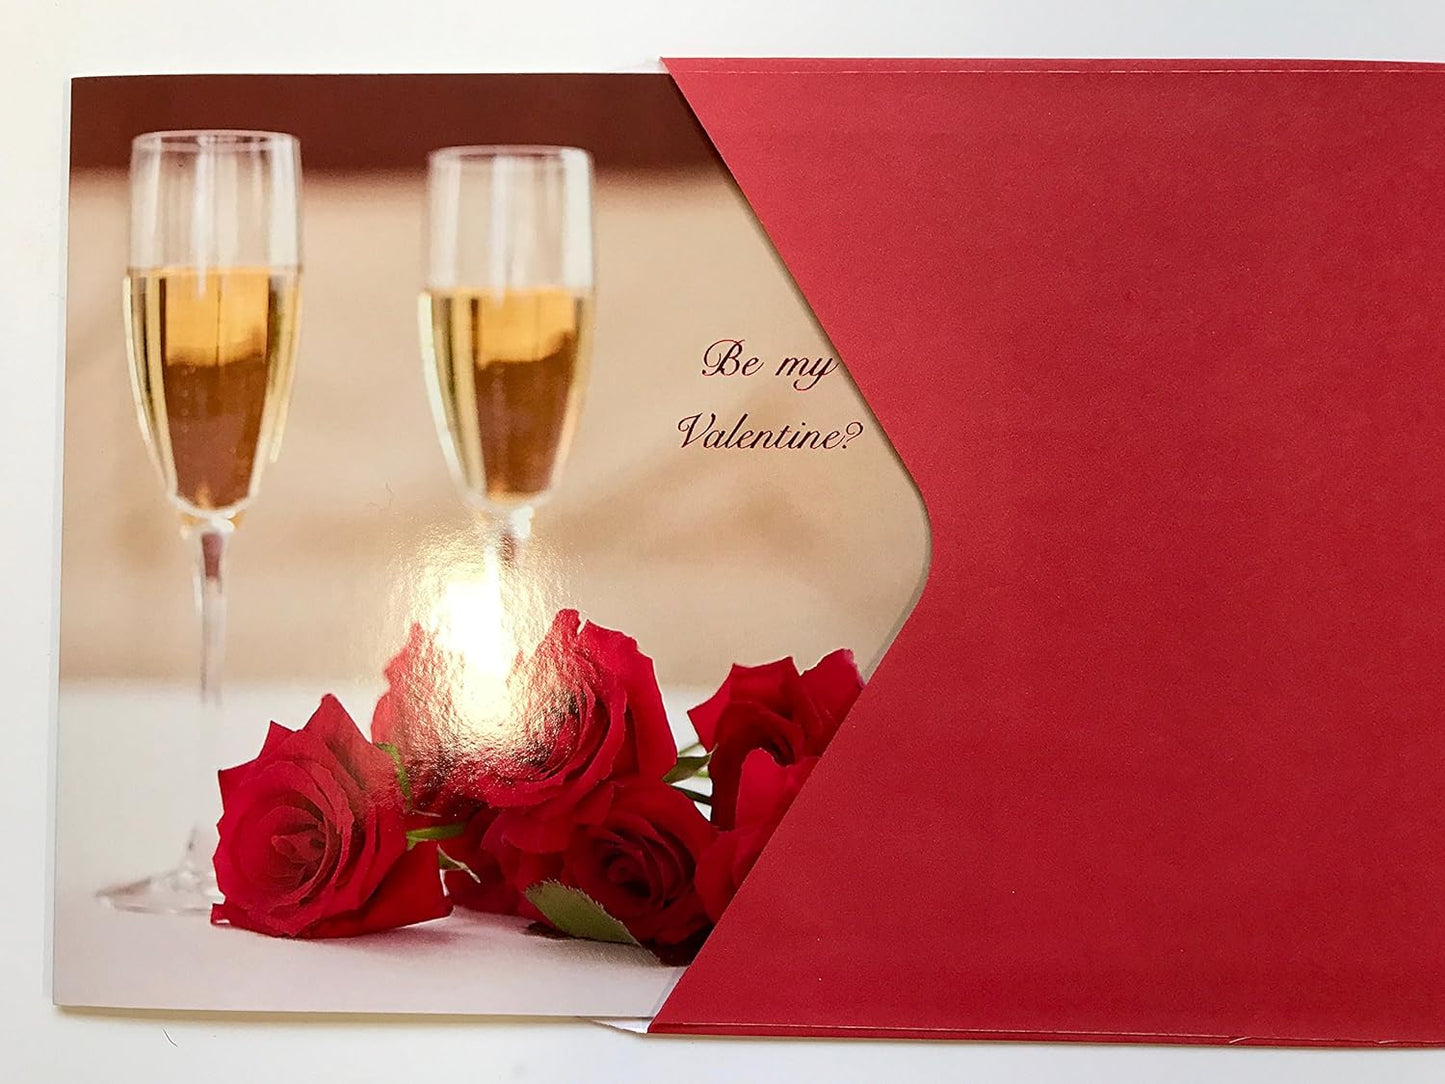 Be my Valentine? Champagne Glass & Roses Valentine's Day Greeting Card